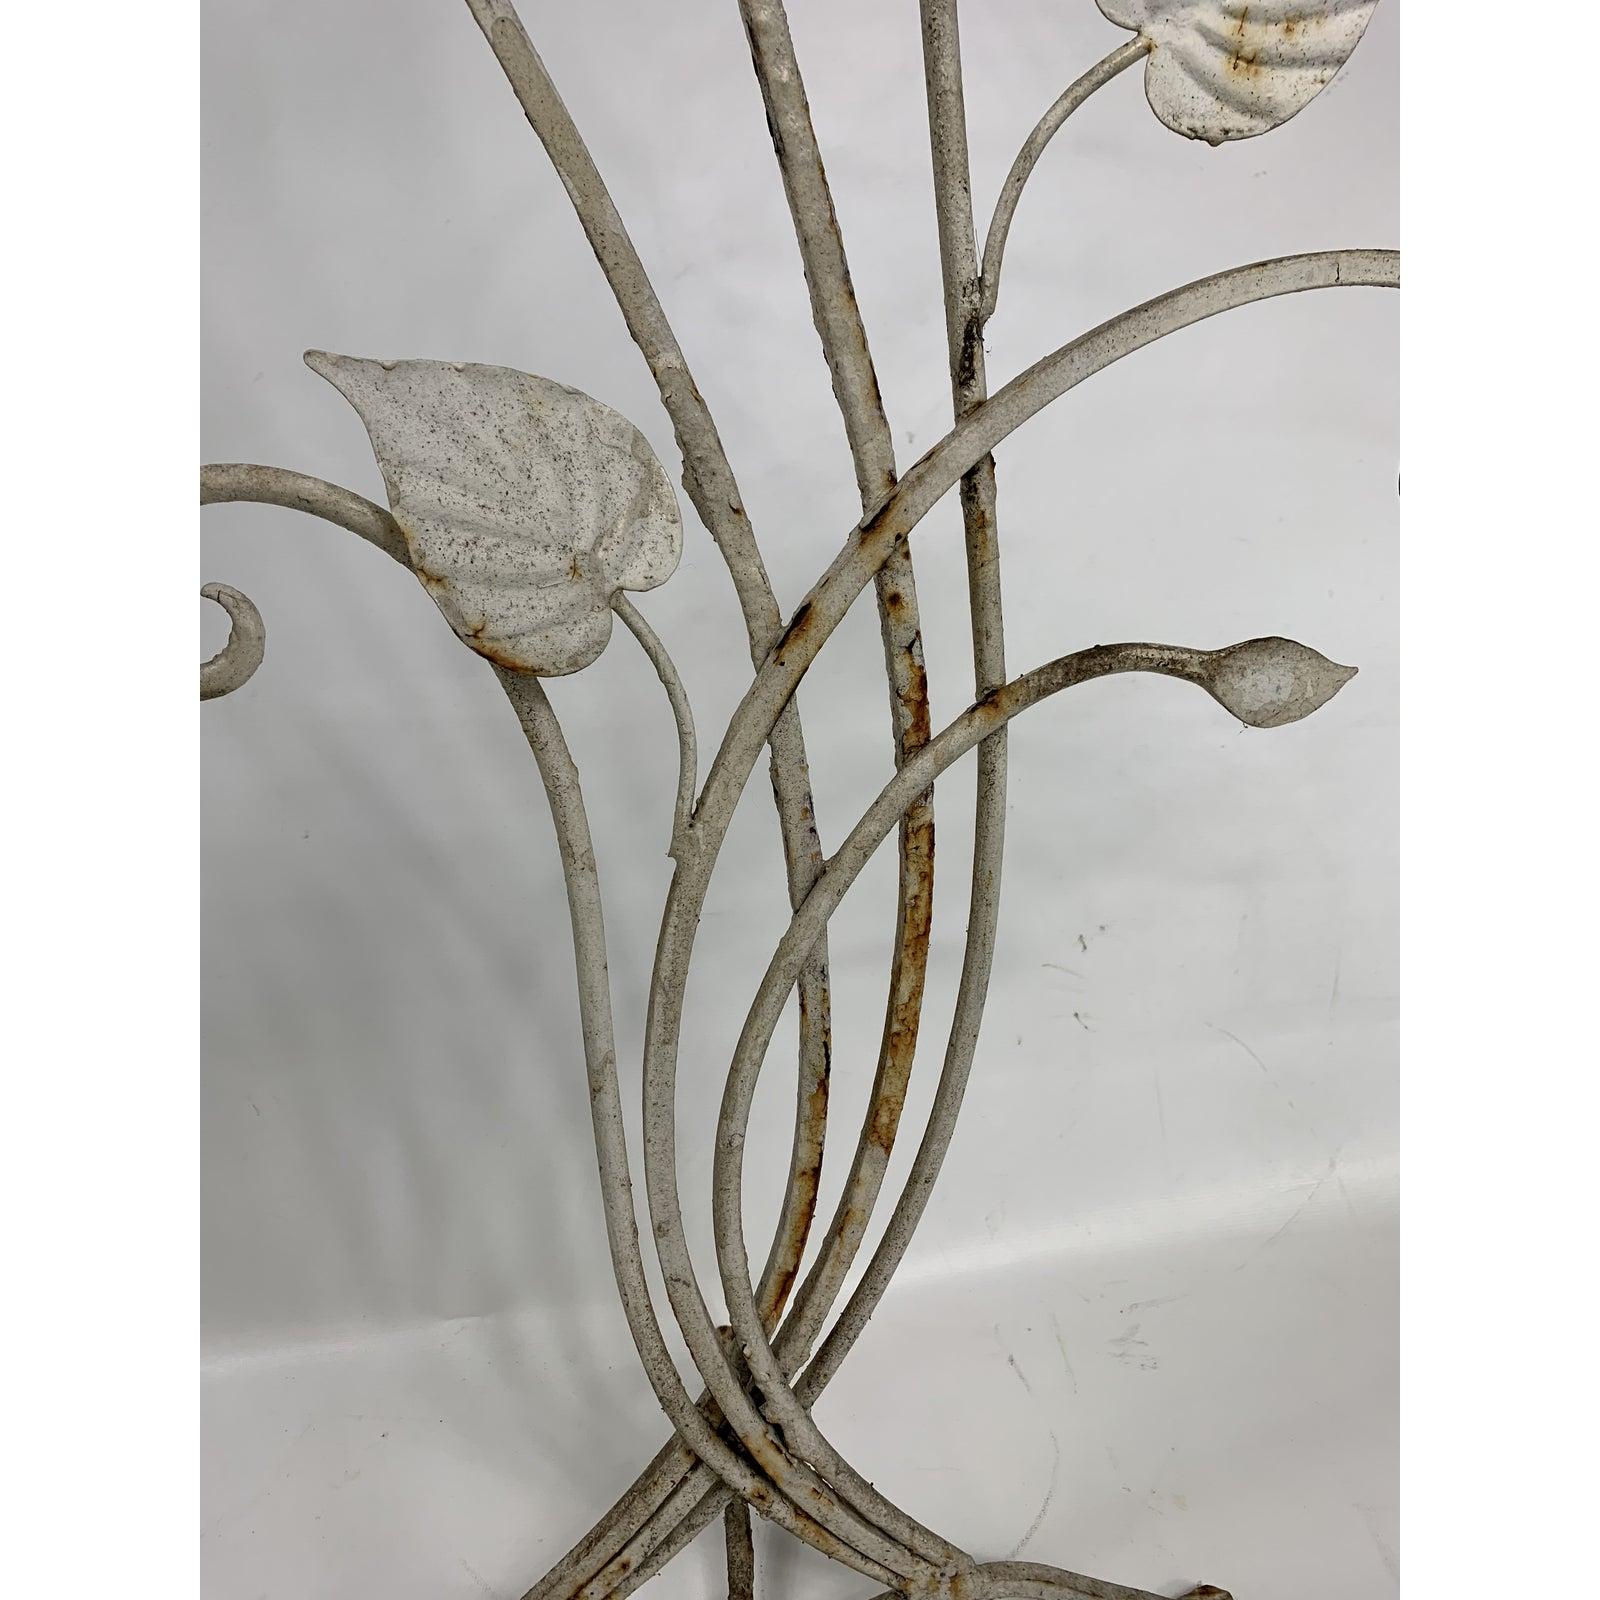 For sale is this gorgeous Salterini plant stand. The stand is an unusual large size, usually found in much smaller sizes.